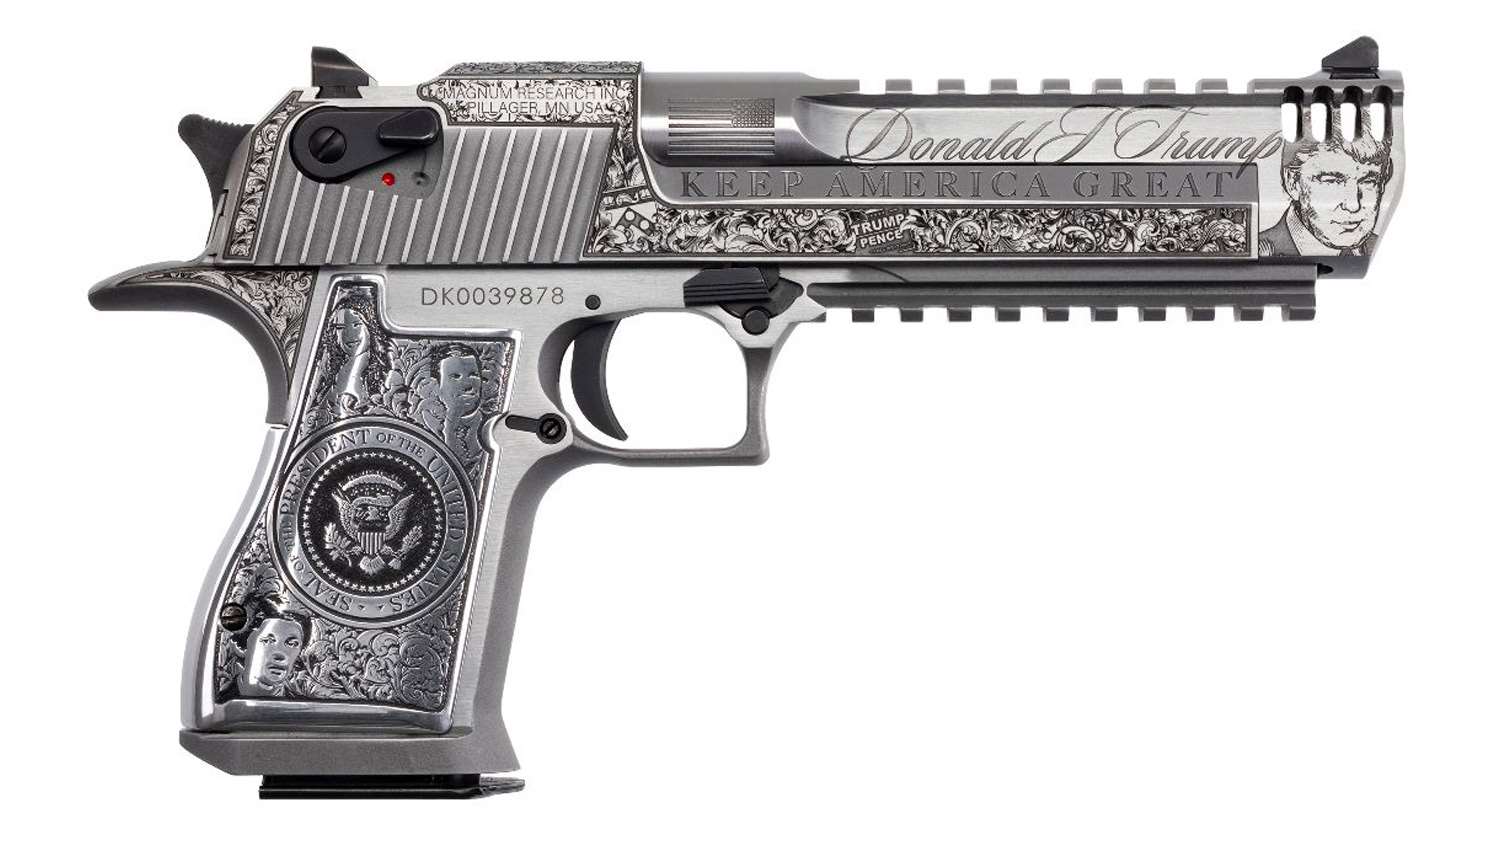 New Presidential Desert Eagle with special President Donald Trump engravings